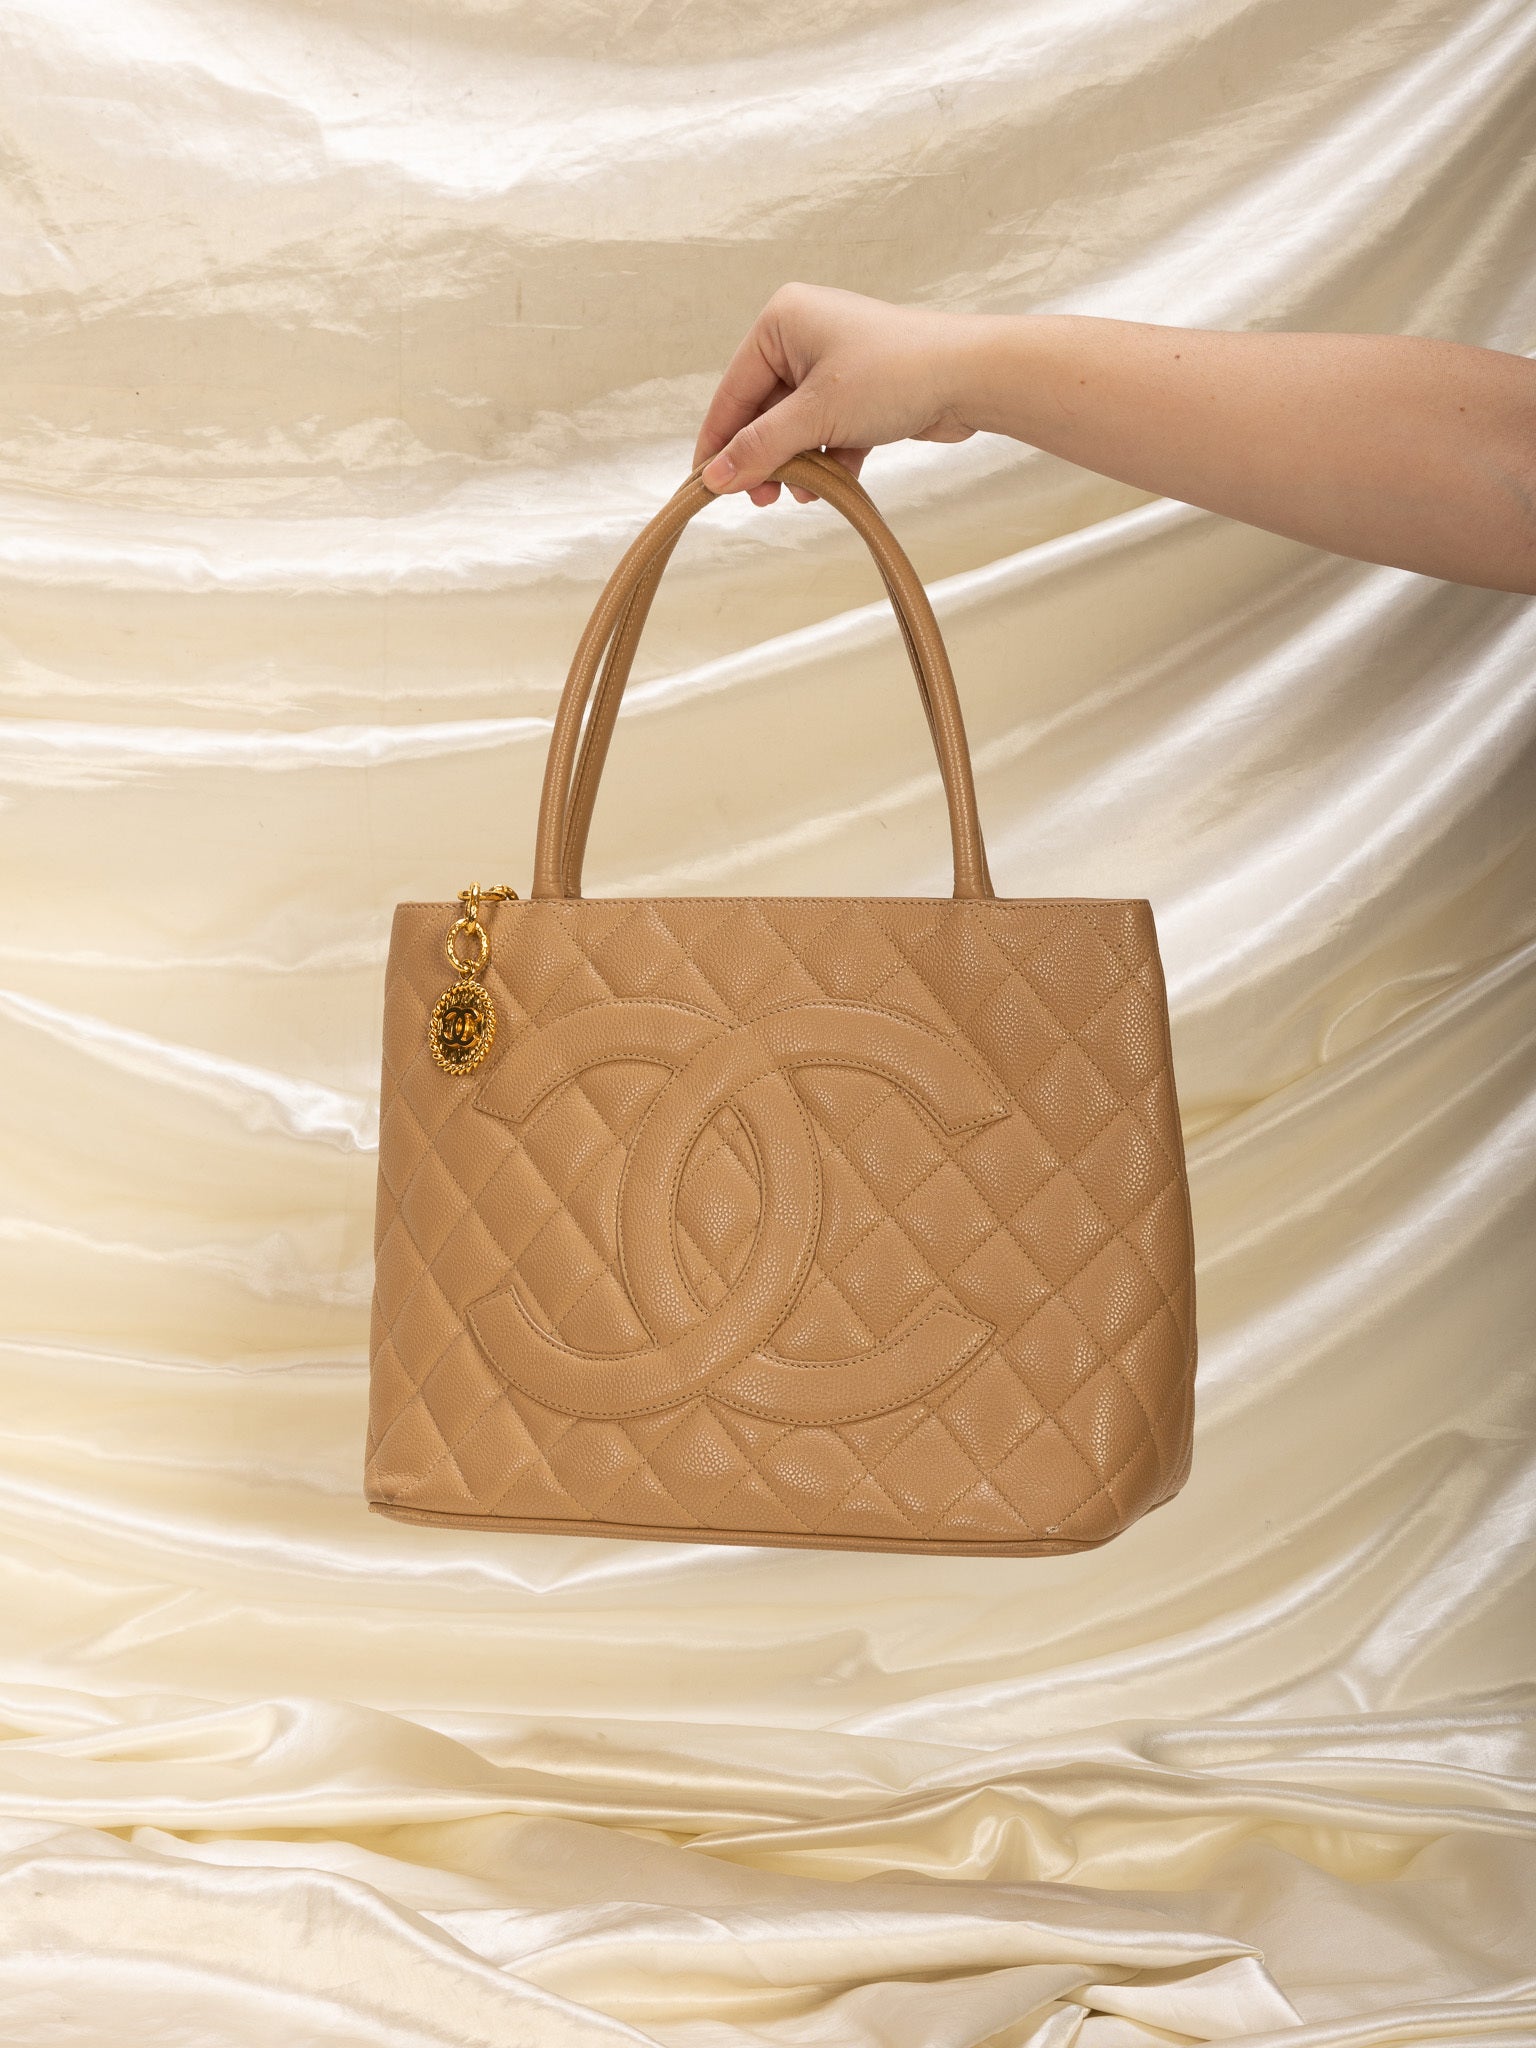 Chanel Timeless Medallion Tote